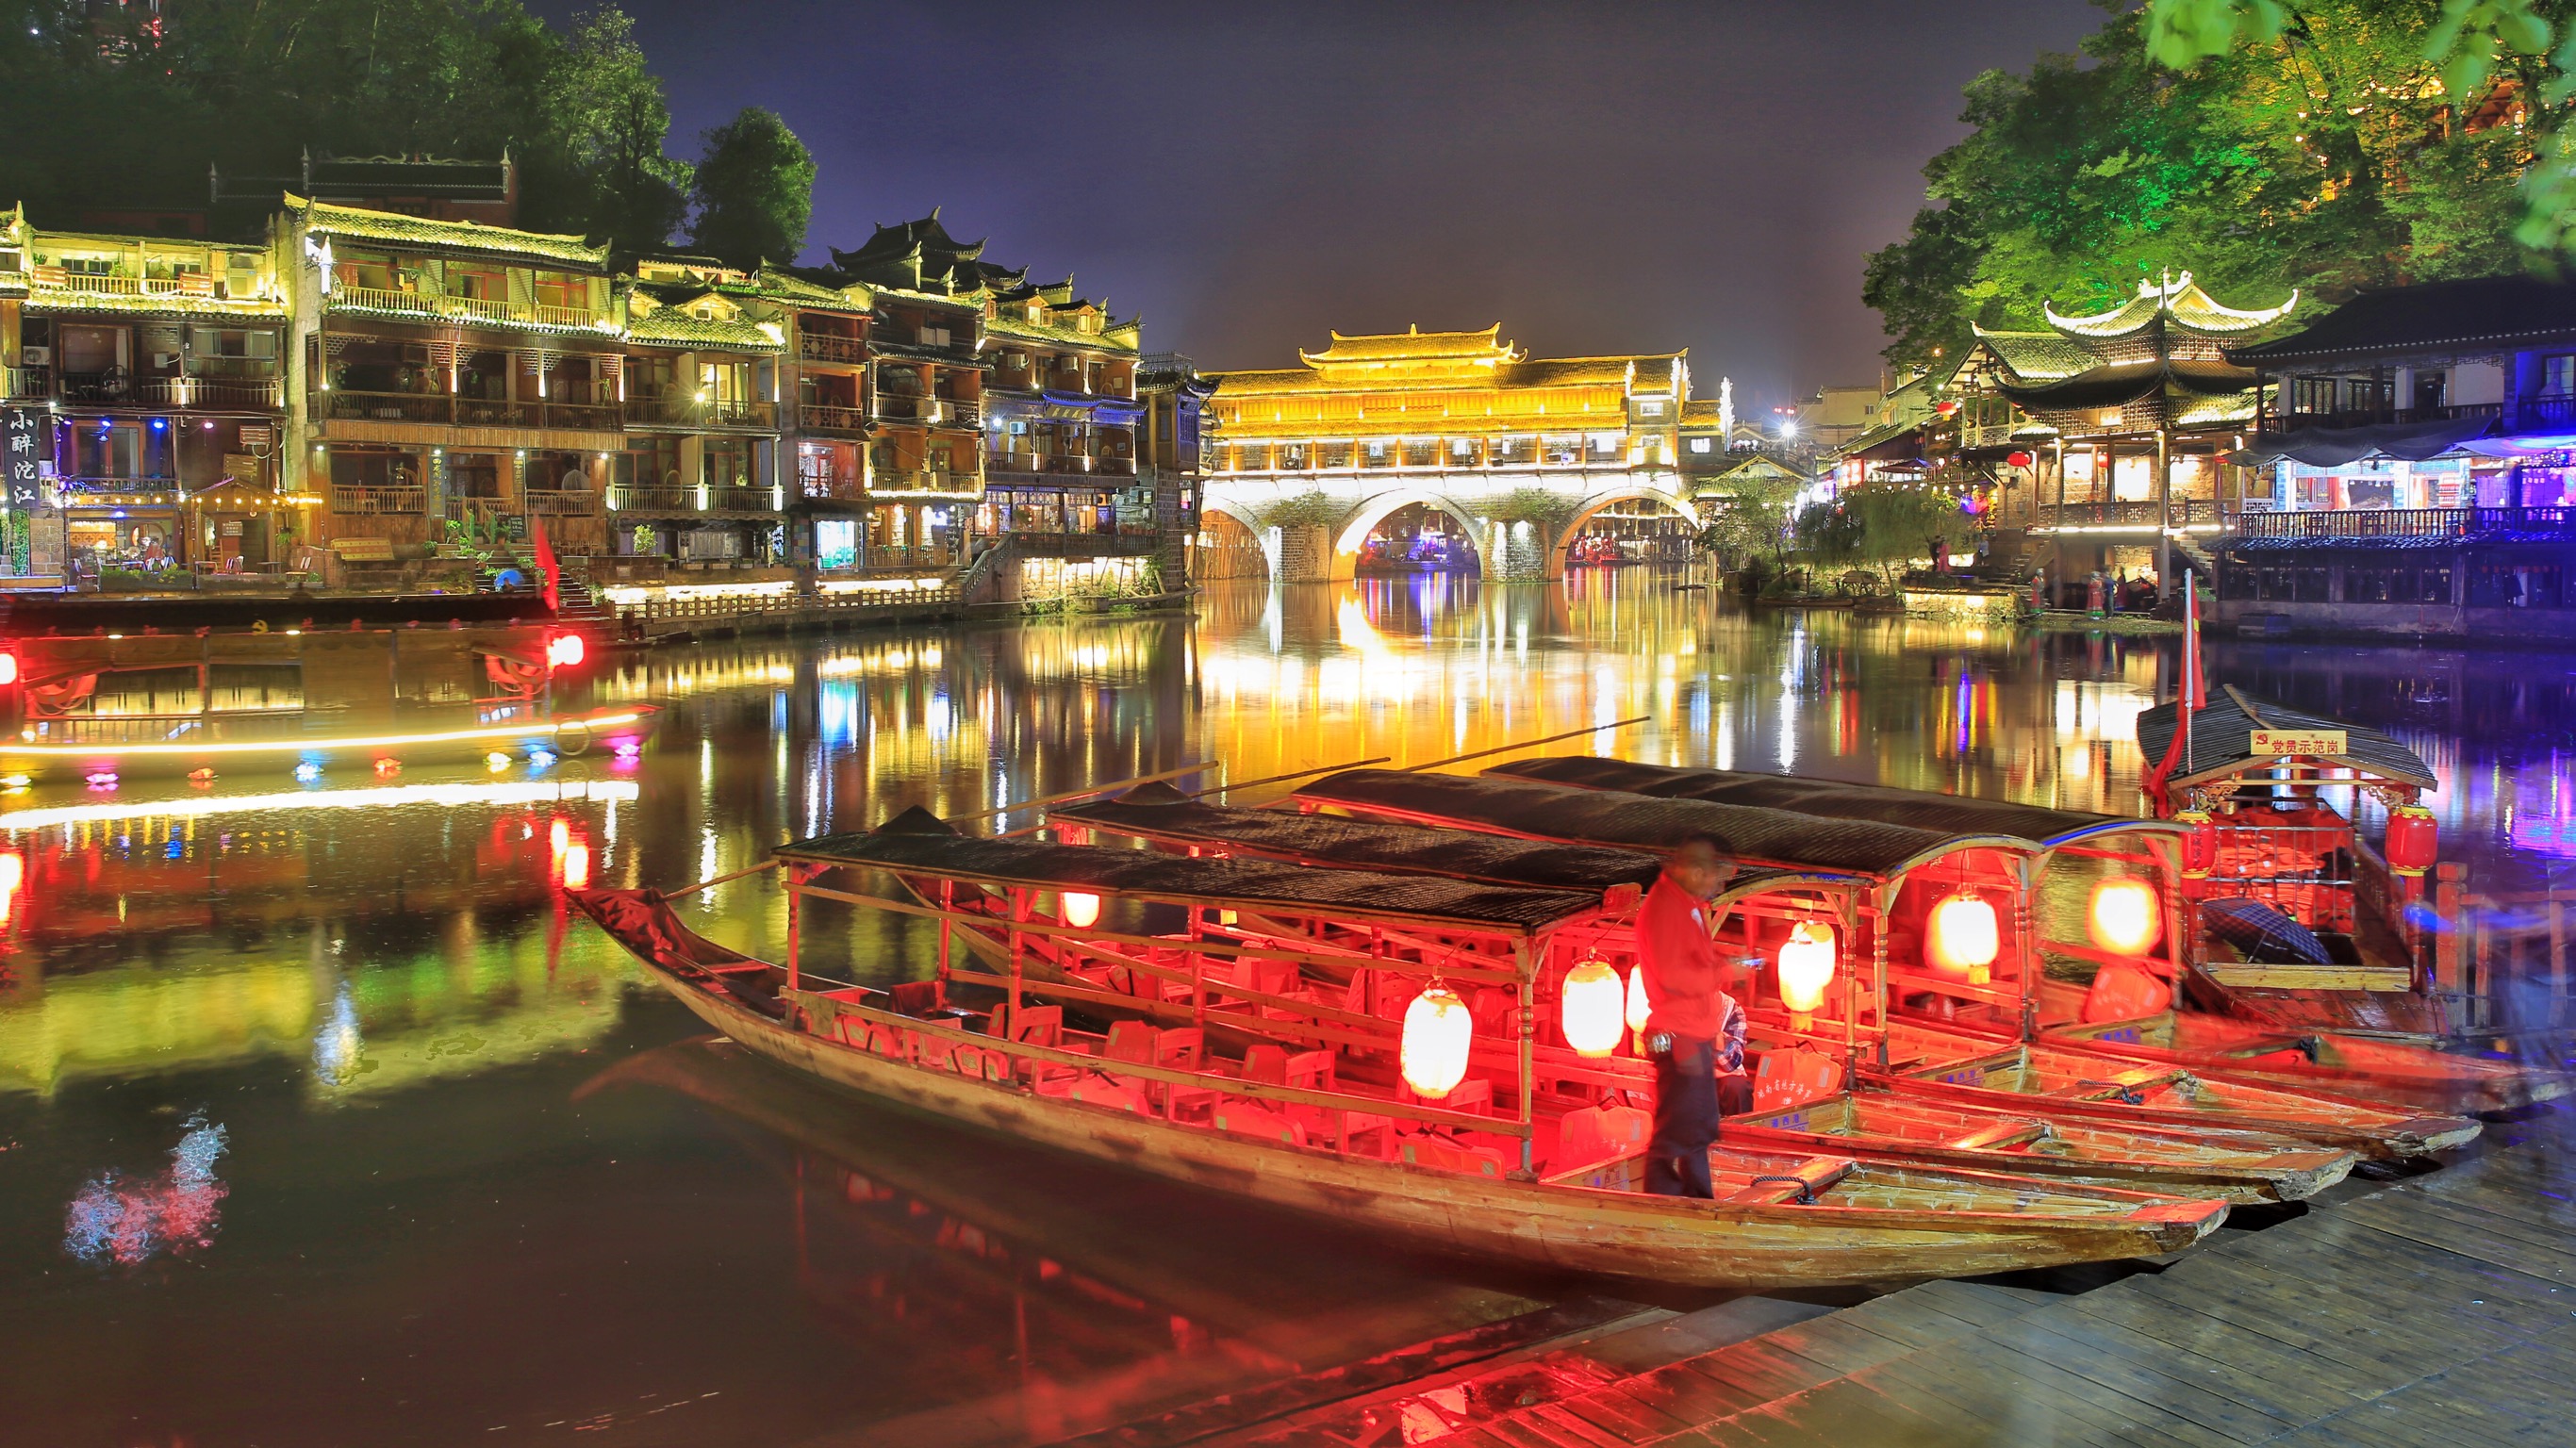 Fenghuang Ancient Town attraction reviews - Fenghuang Ancient Town tickets  - Fenghuang Ancient Town discounts - Fenghuang Ancient Town transportation,  address, opening hours - attractions, hotels, and food near Fenghuang  Ancient Town - Trip.com